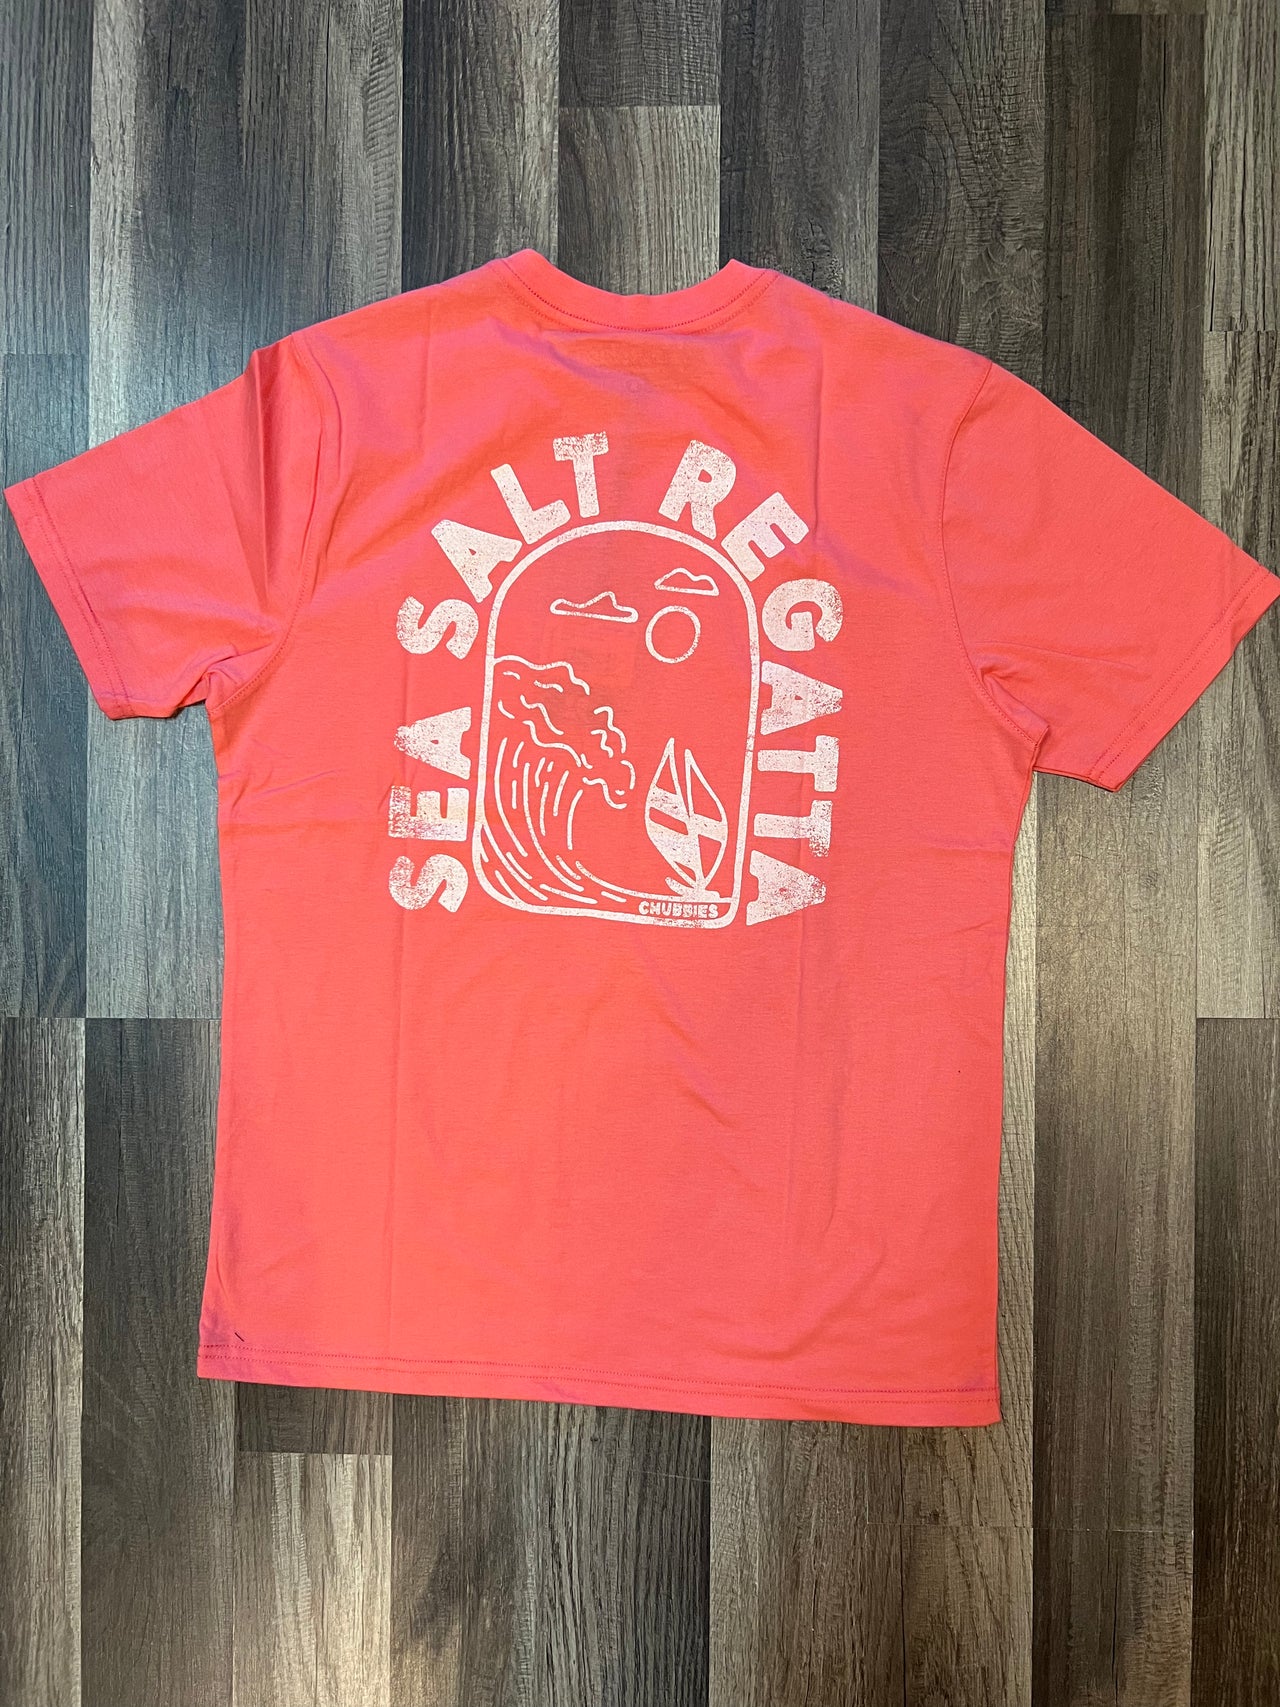  "Chubbies Sea Salt Regatta Pink Short Sleeve Pocket T-Shirt - A soft and durable cotton tee in a refreshing sea salt pink hue. Features a tailored fit, classic crew neckline, and a functional pocket for a touch of nautical charm. Perfect for laid-back style and seaside adventures."